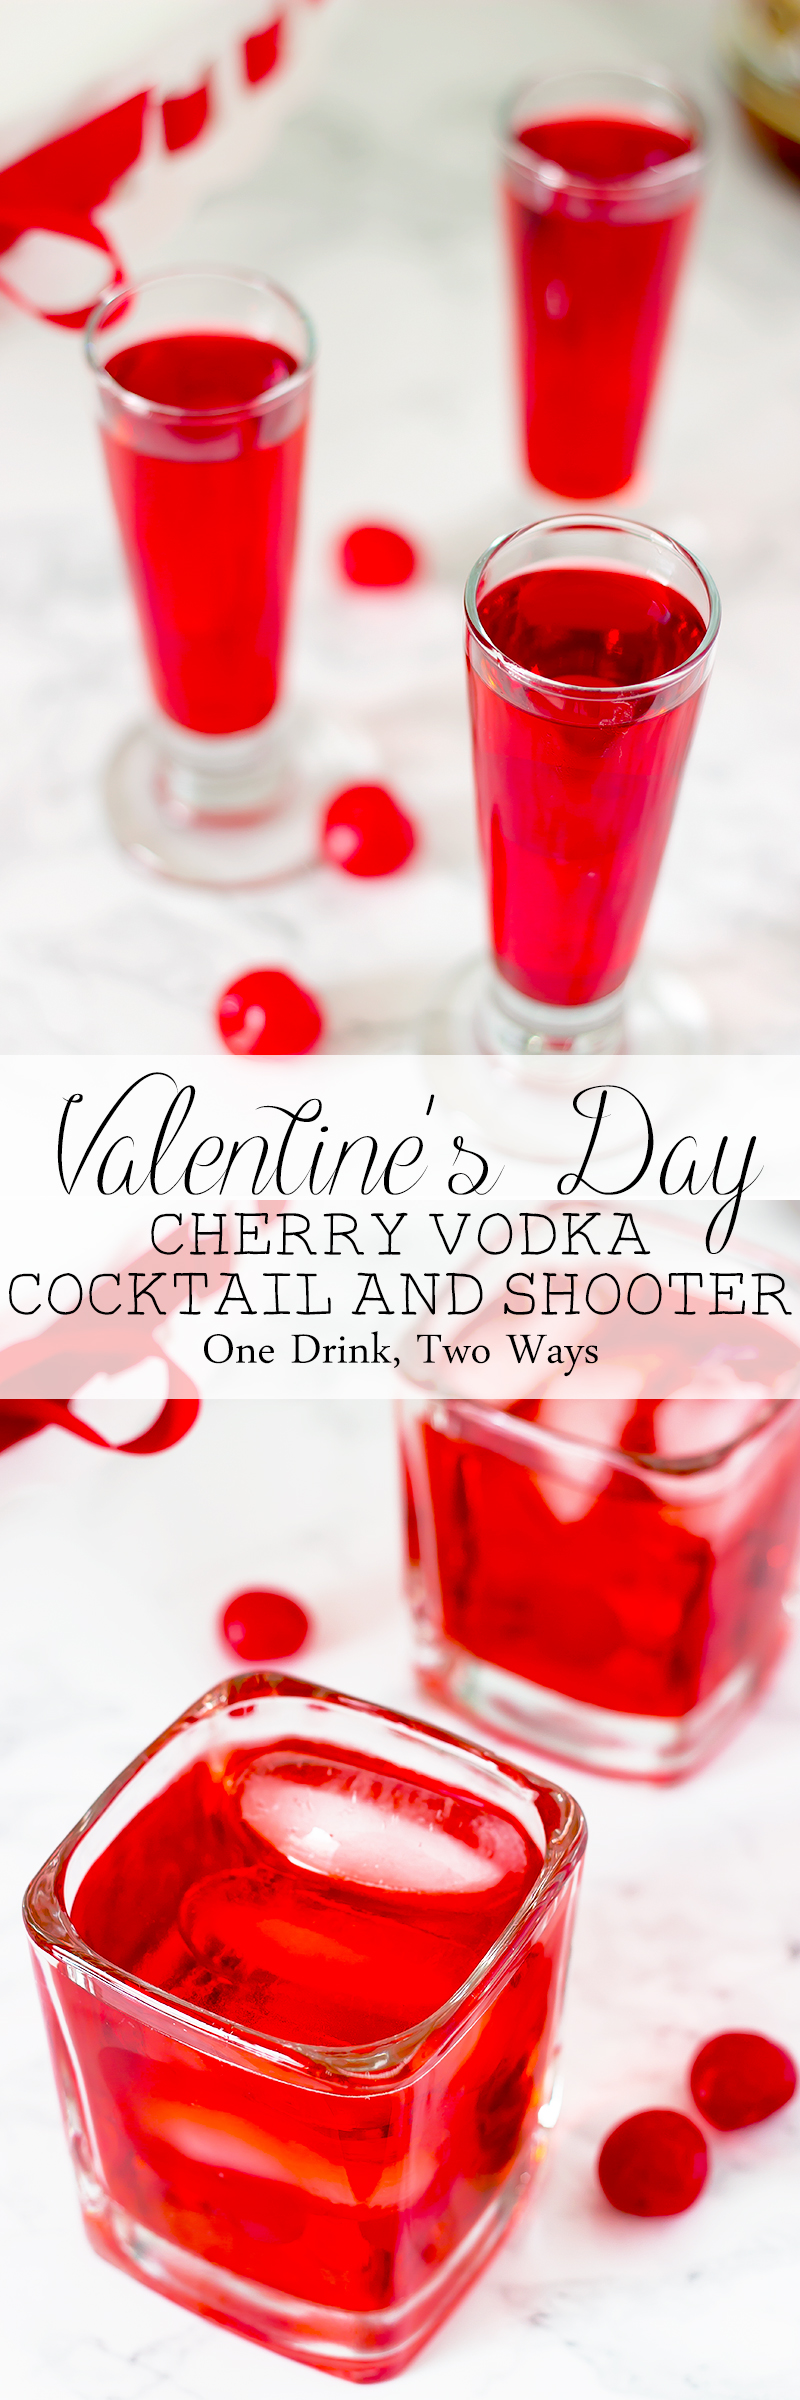 Cherry Vodka Cocktail and Shooter